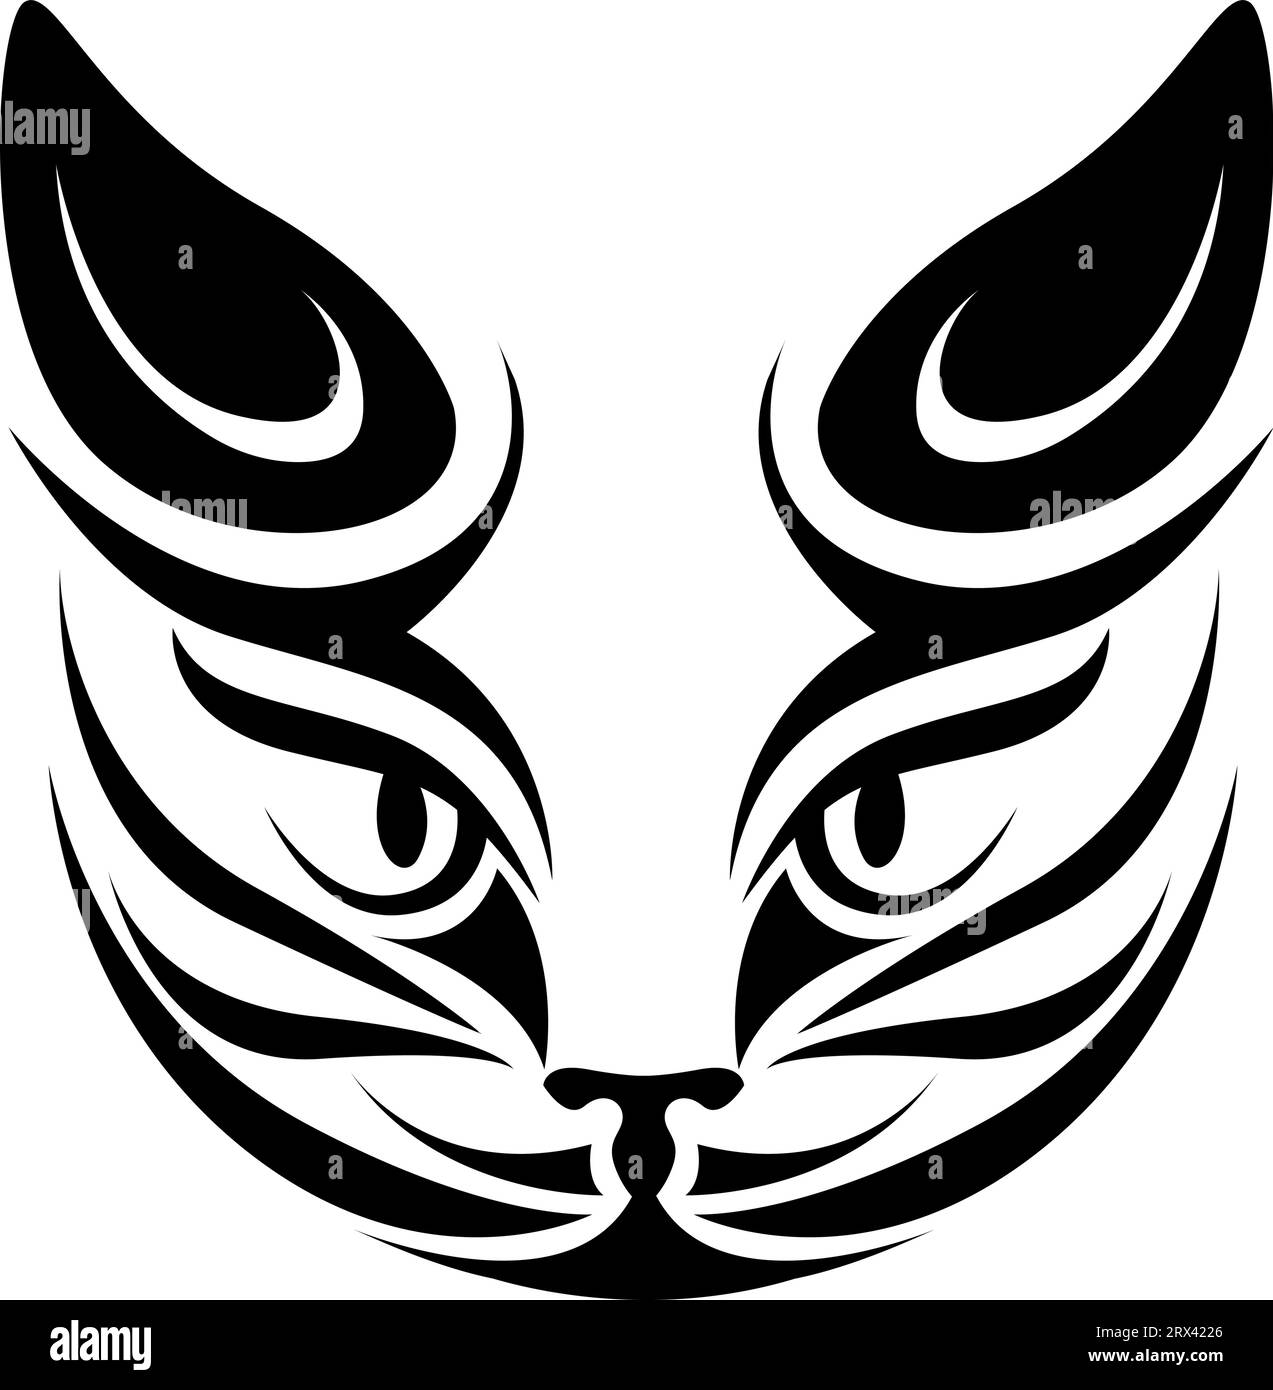 Tribal cat head tattoo, tattoo illustration, vector on a white background. Stock Vector